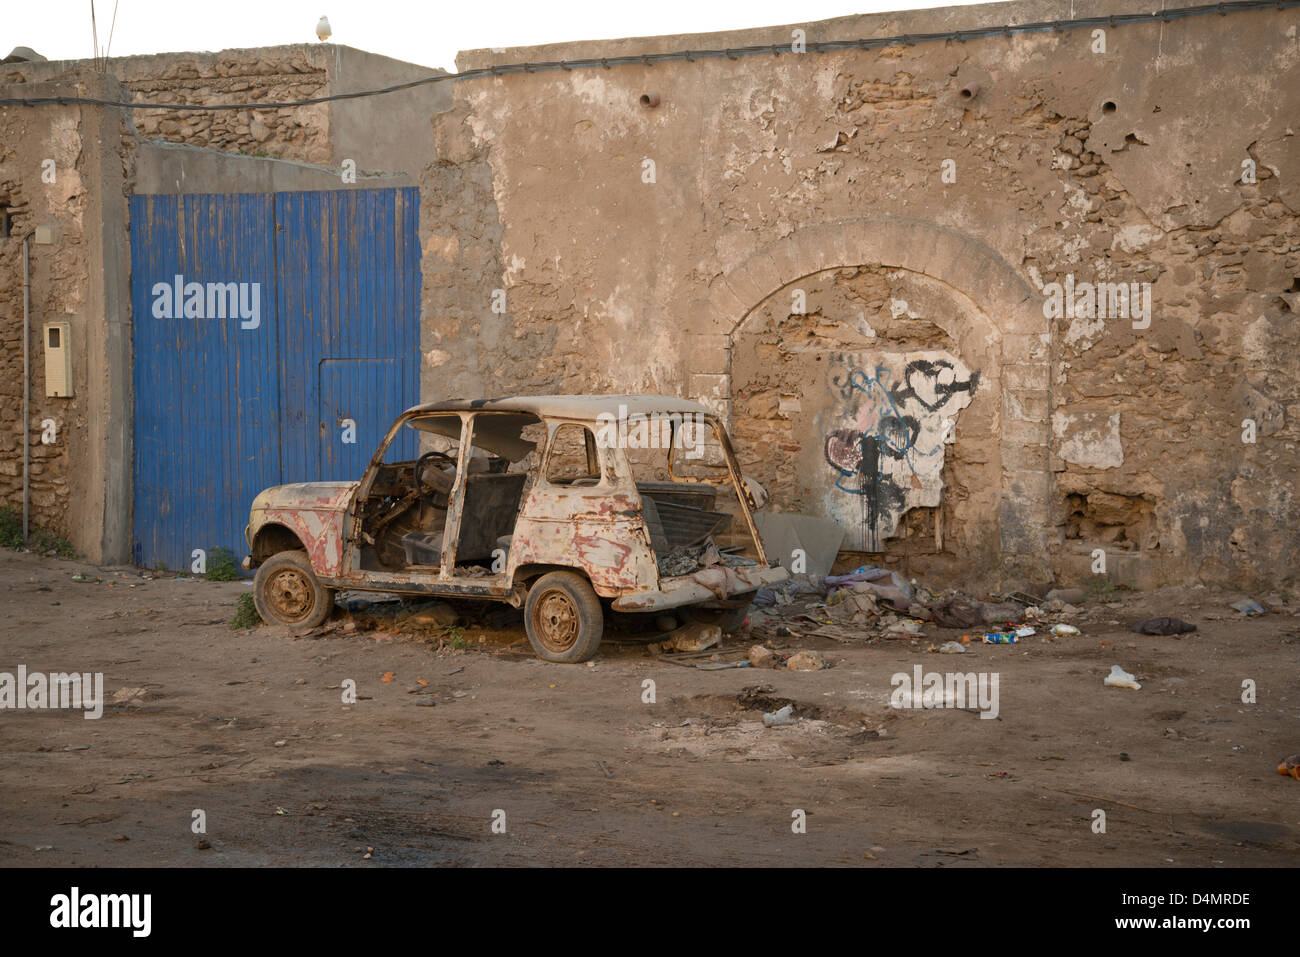 Renault 4 car abandoned on a dusty street in Morocco Stock Photo